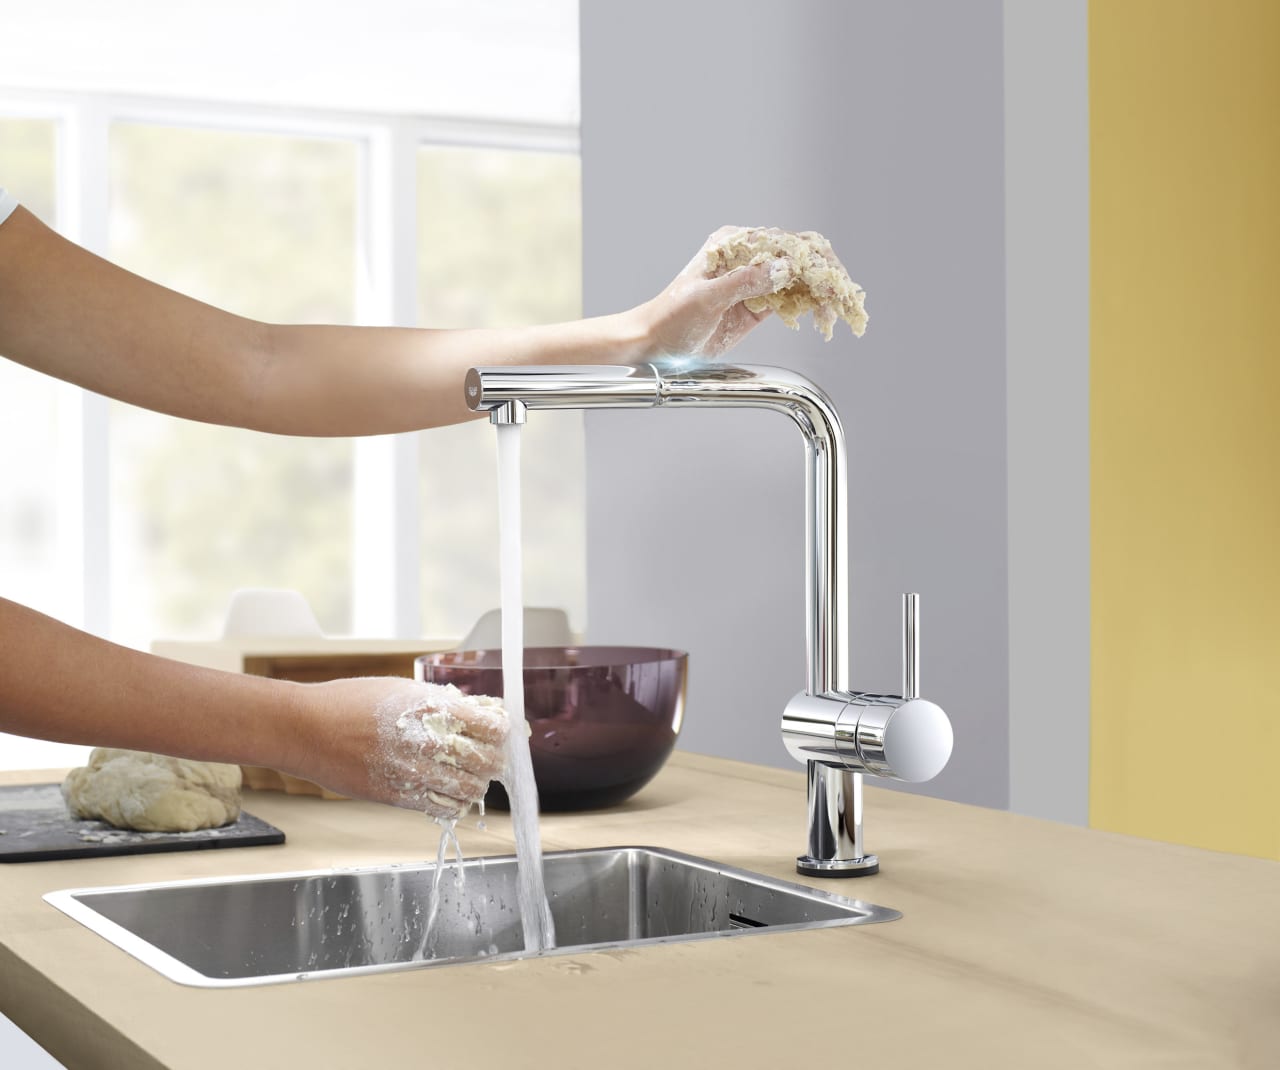 Tips on how to buy quality bathroom tapware online